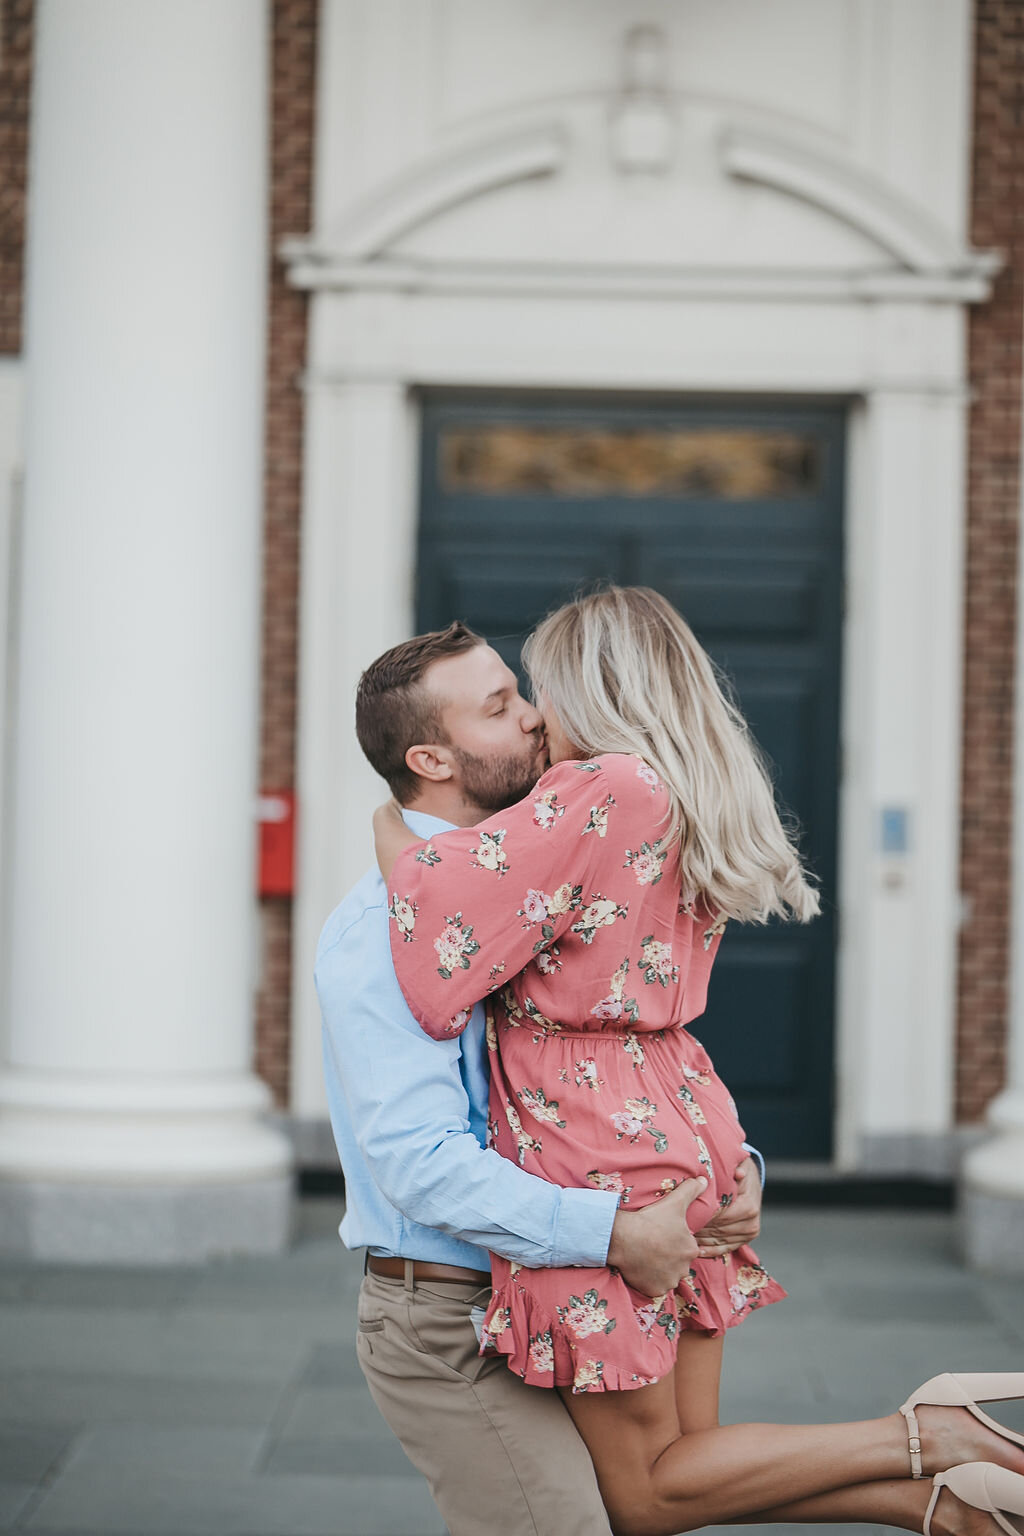 This dreamy Lancaster, PA engagement session by Lauren Bliss Photography features Franklin and Marshall college and Longs Park.